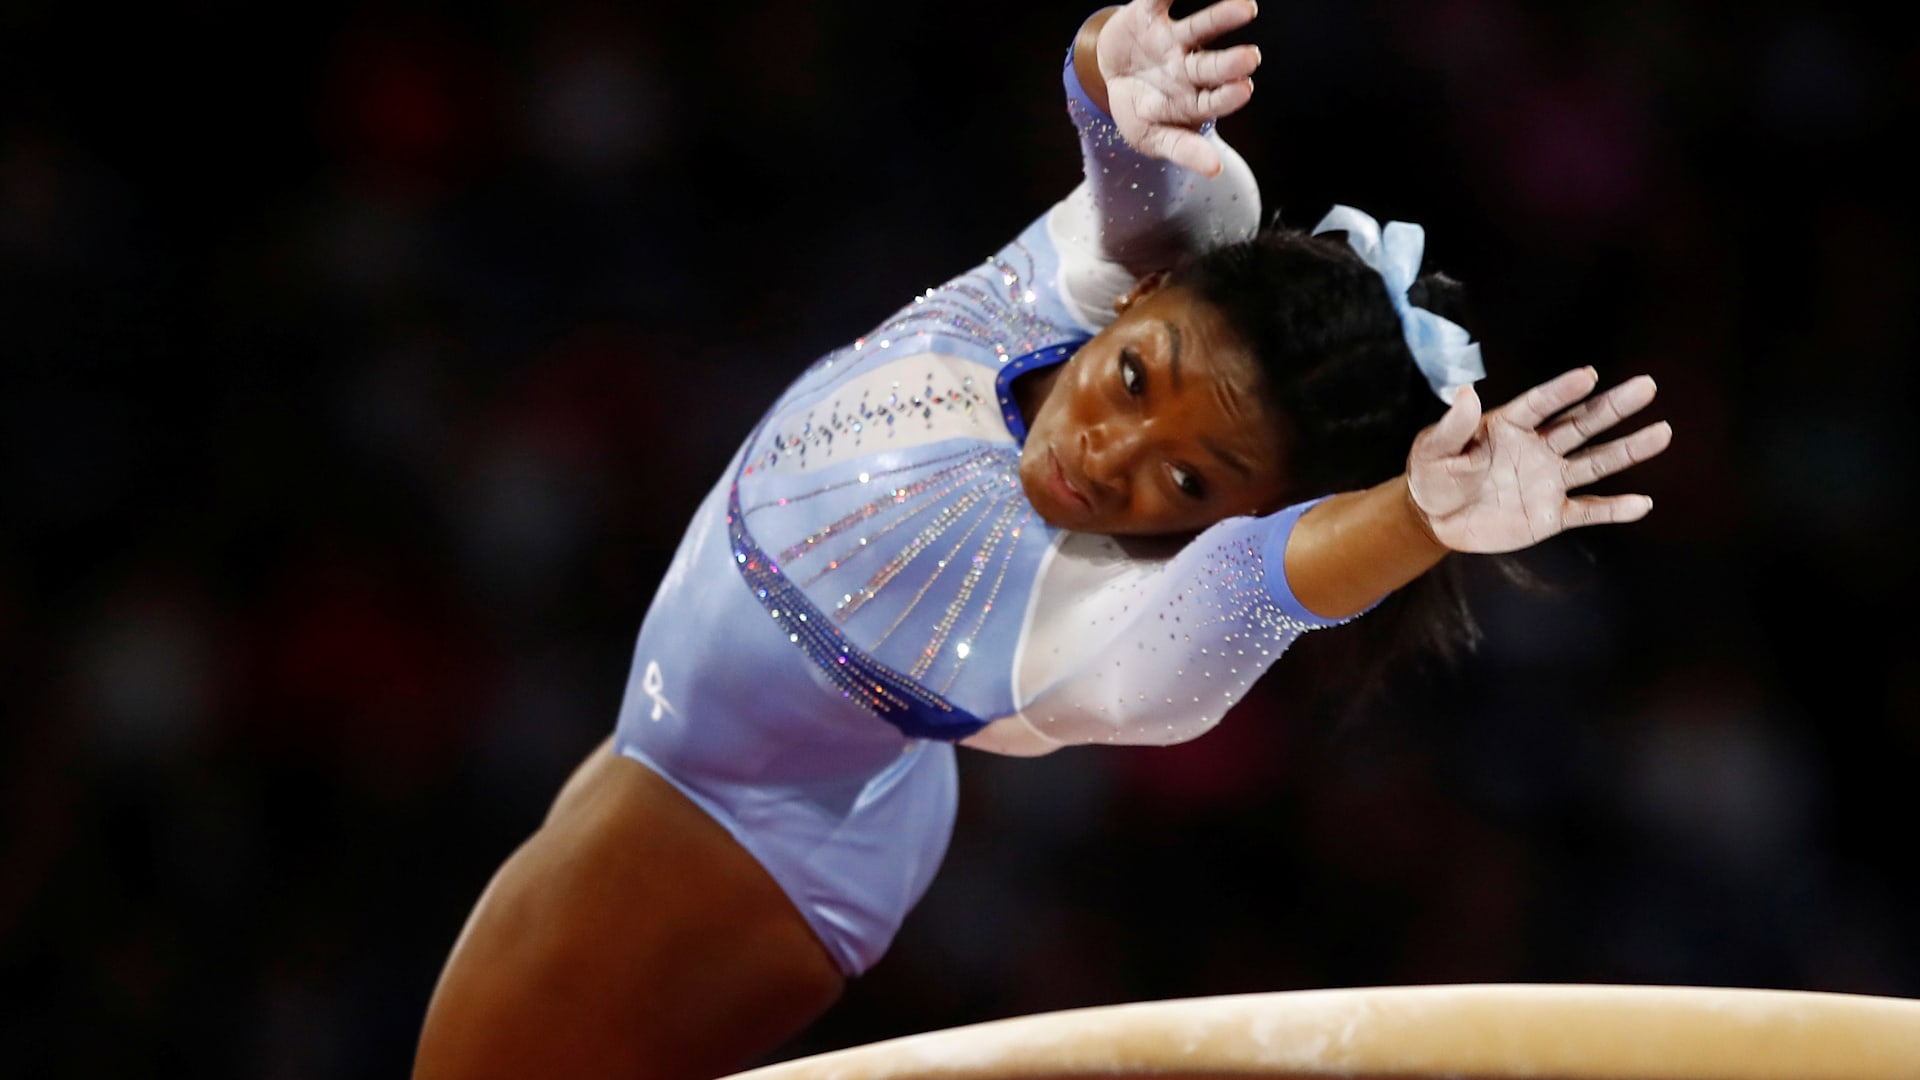 As It Happened Fig Artistic Gymnastics World Championships Day 2